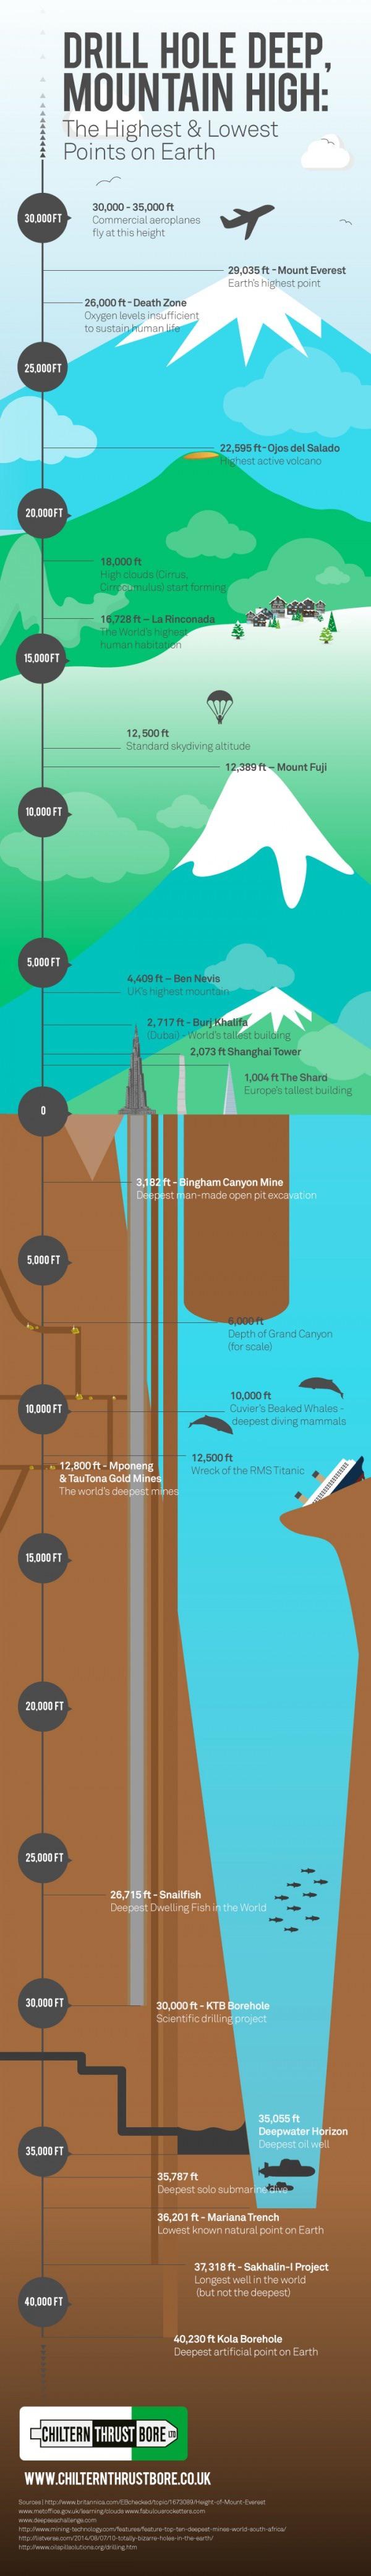 lowest point on earth - Drill Hole Deep Mountain High The Highest & Lowest Points on Earth 30,000FT 30,000 35,000 ft Commercial aeroplanes fly at this height 29,035 ft Mount Everest Earth's highest point 26,000 ftDeath Zone Oxygen levels insufficient to s